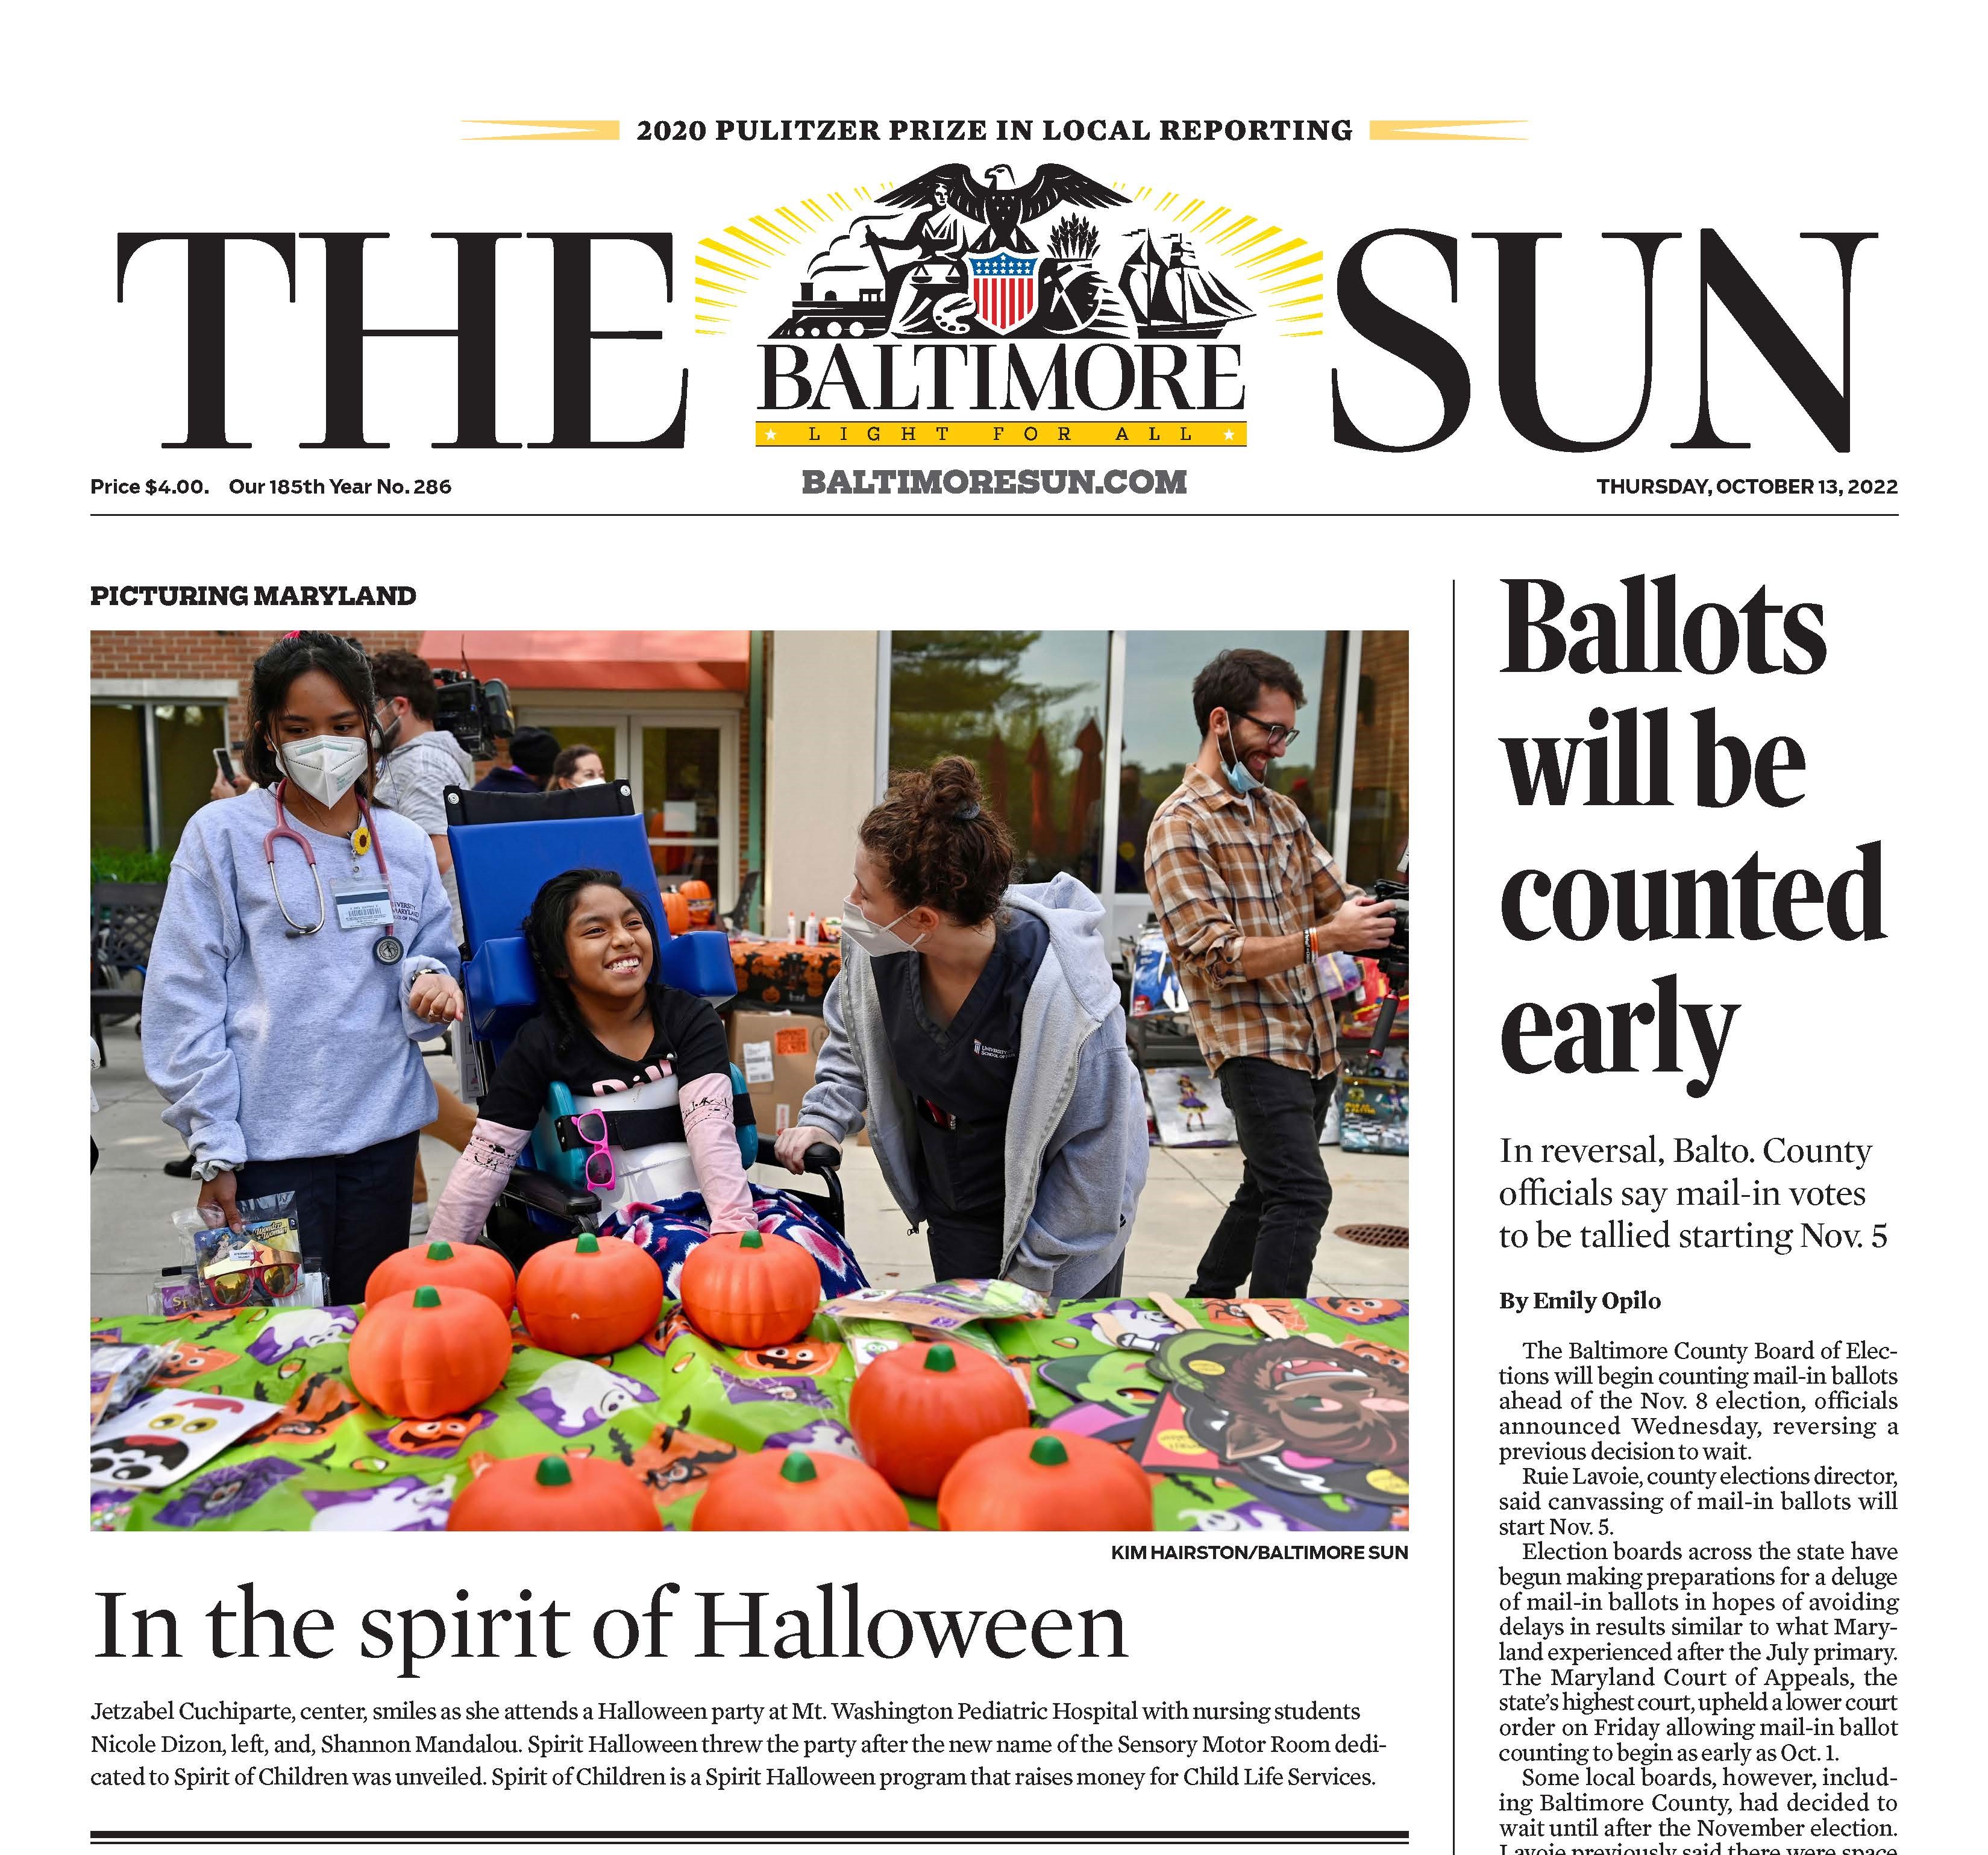 capture of front page of Baltimore Sun; photo of two nursing students with young patient in wheelchair, along with plastic pumpkins and decorations